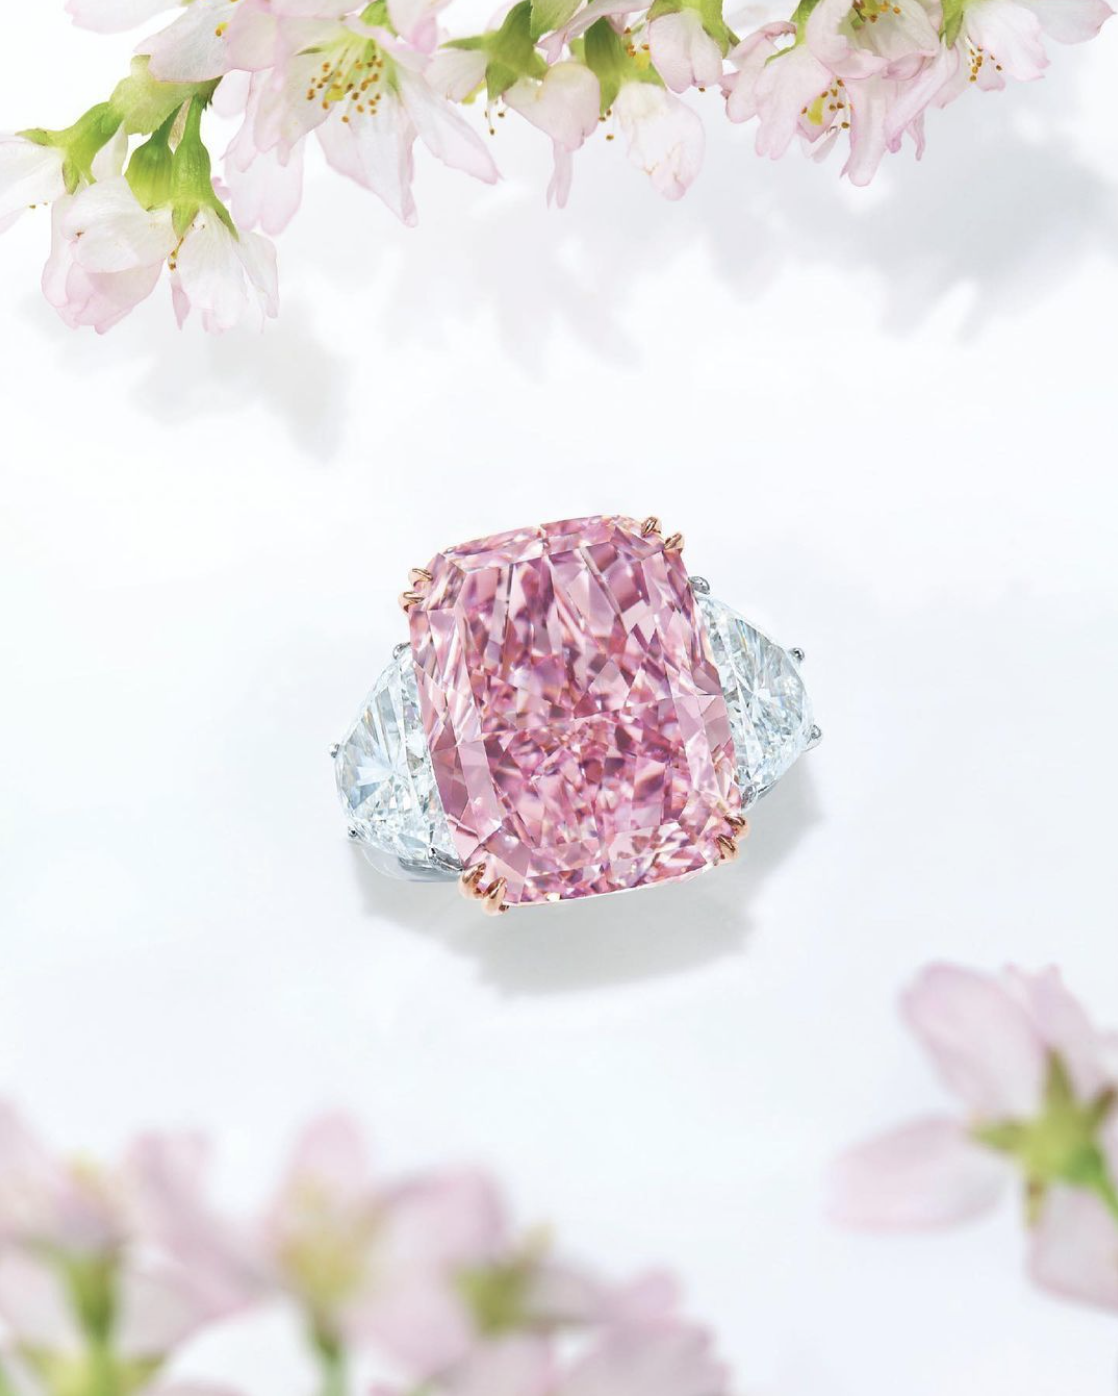 Flawless Pink Diamond Breaks Auction Record